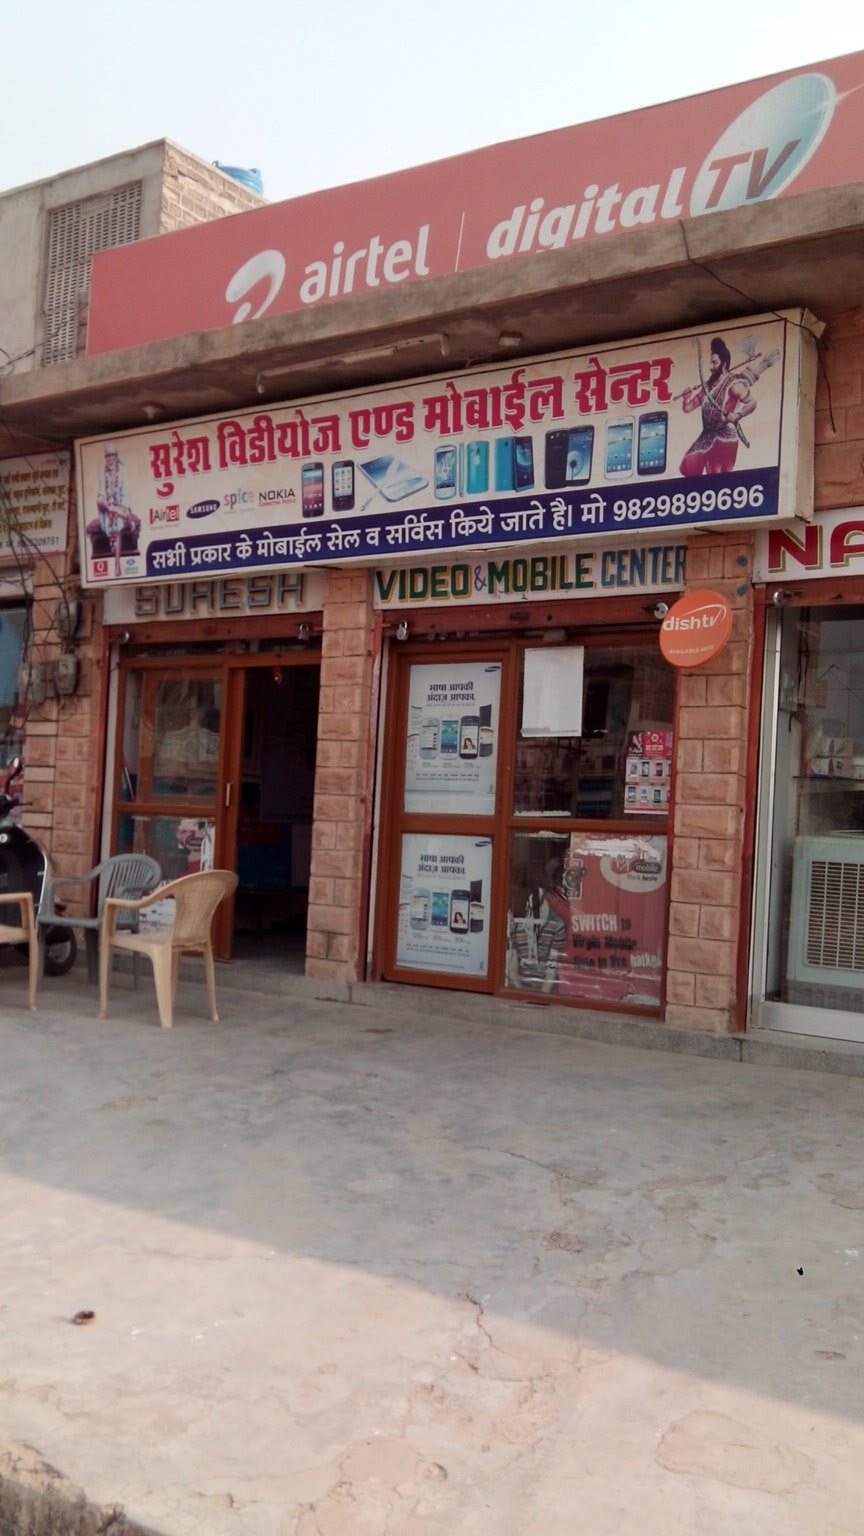 Suresh Videos And Mobile Store